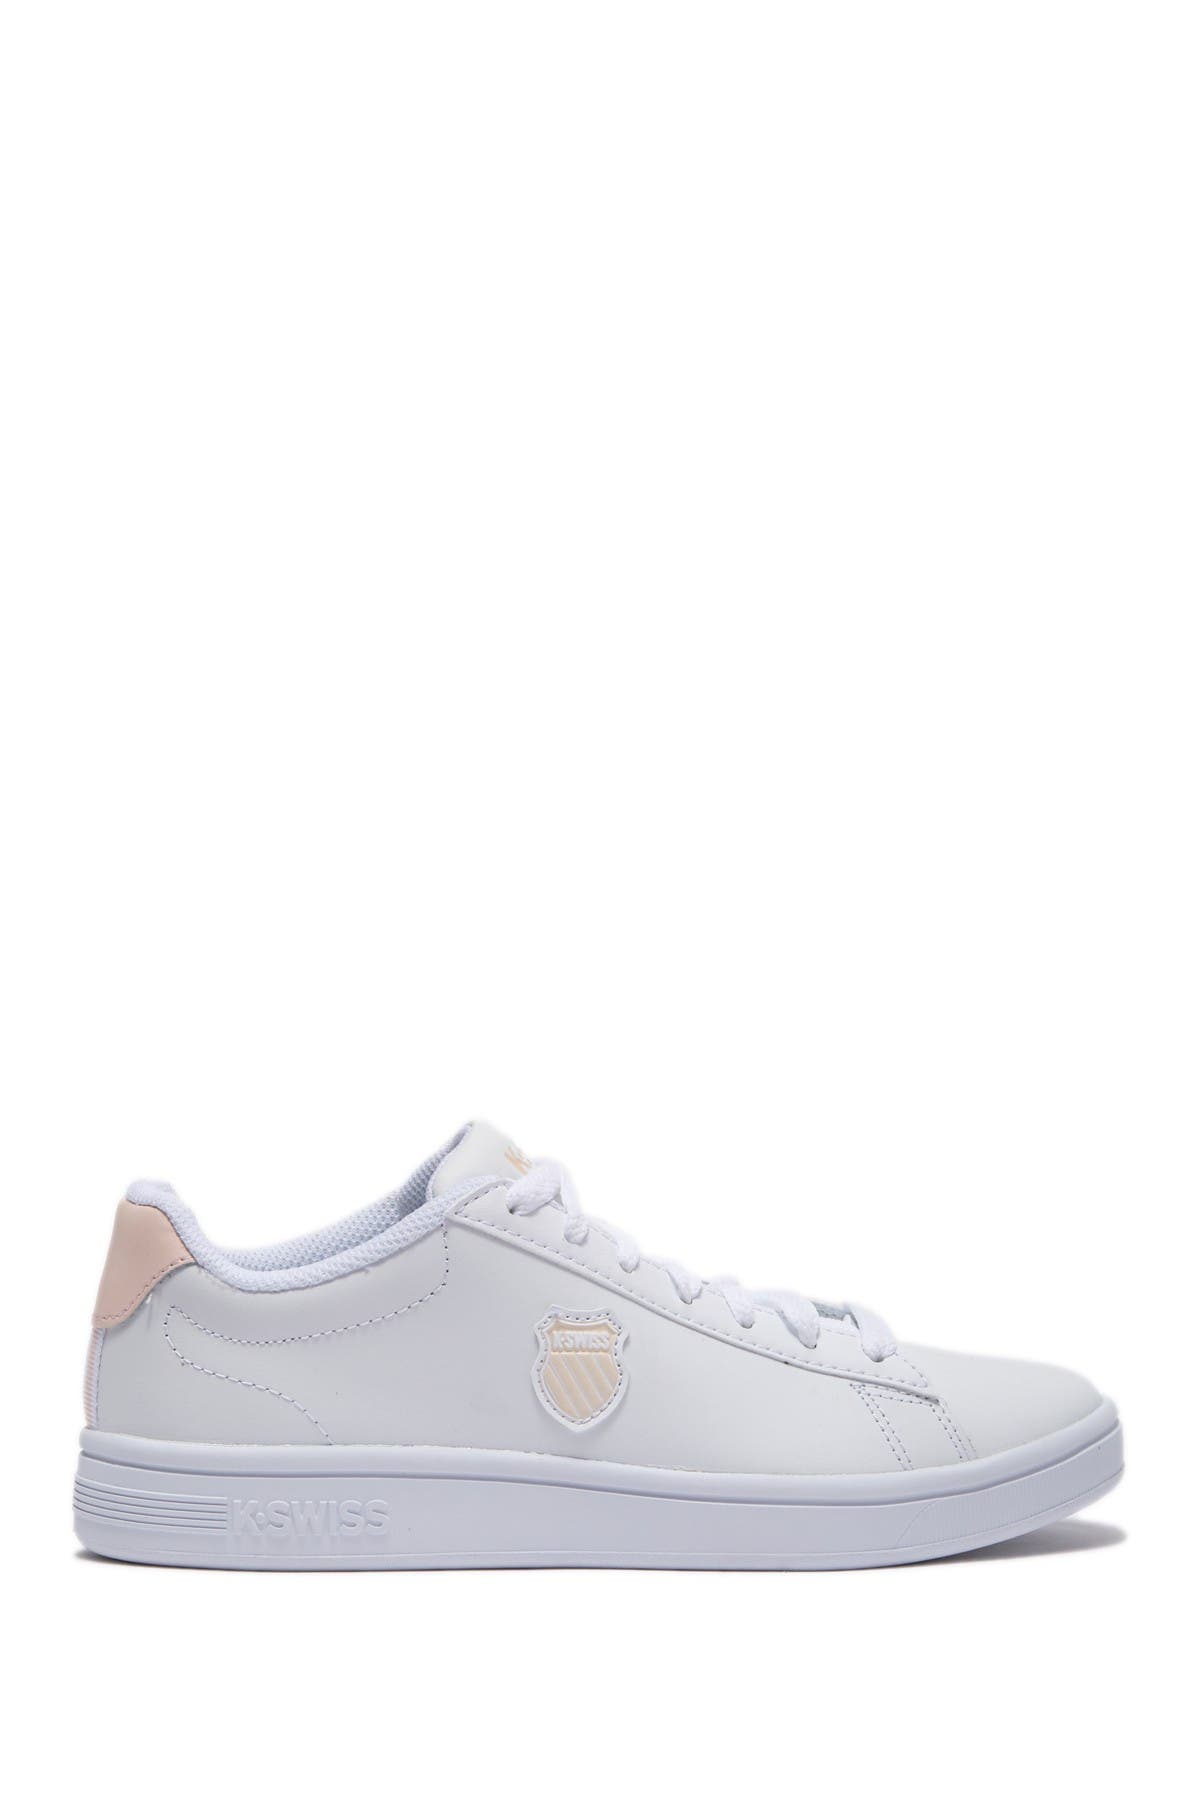 K-swiss Court Shield Leather Sneaker In Natural3